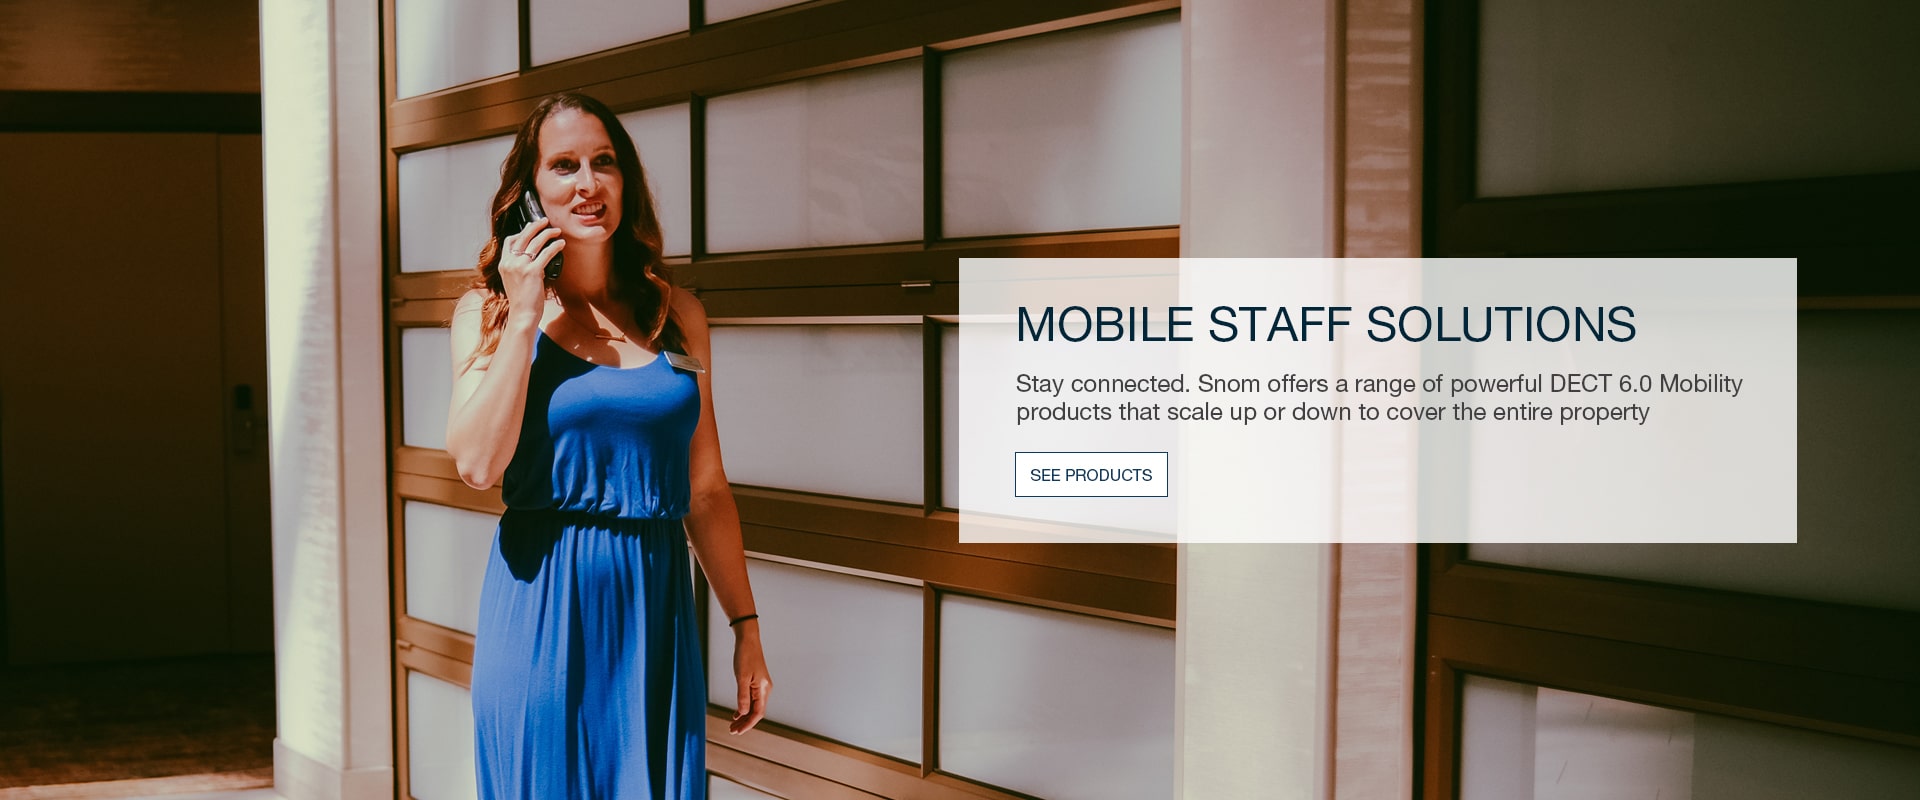 Mobile Staff Solutions